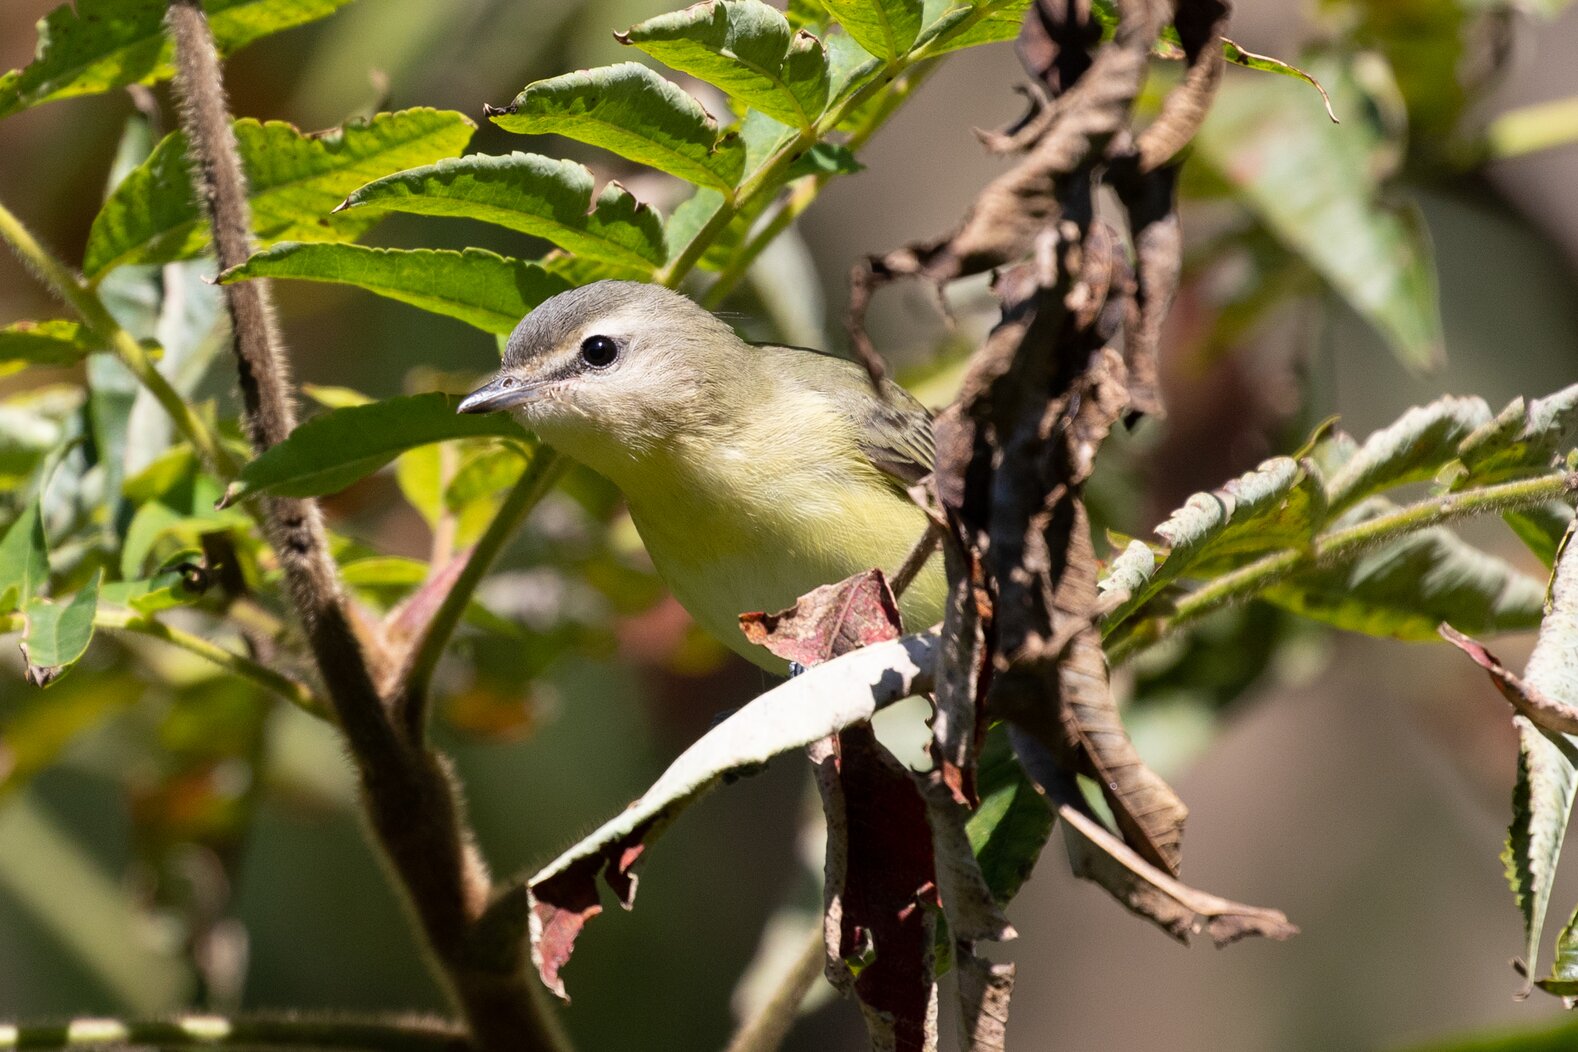 Many migrants including the rare Philadelphia Vireo have been spotted in Peter Detmold Park. Photo: Ryan F. Mandelbaum